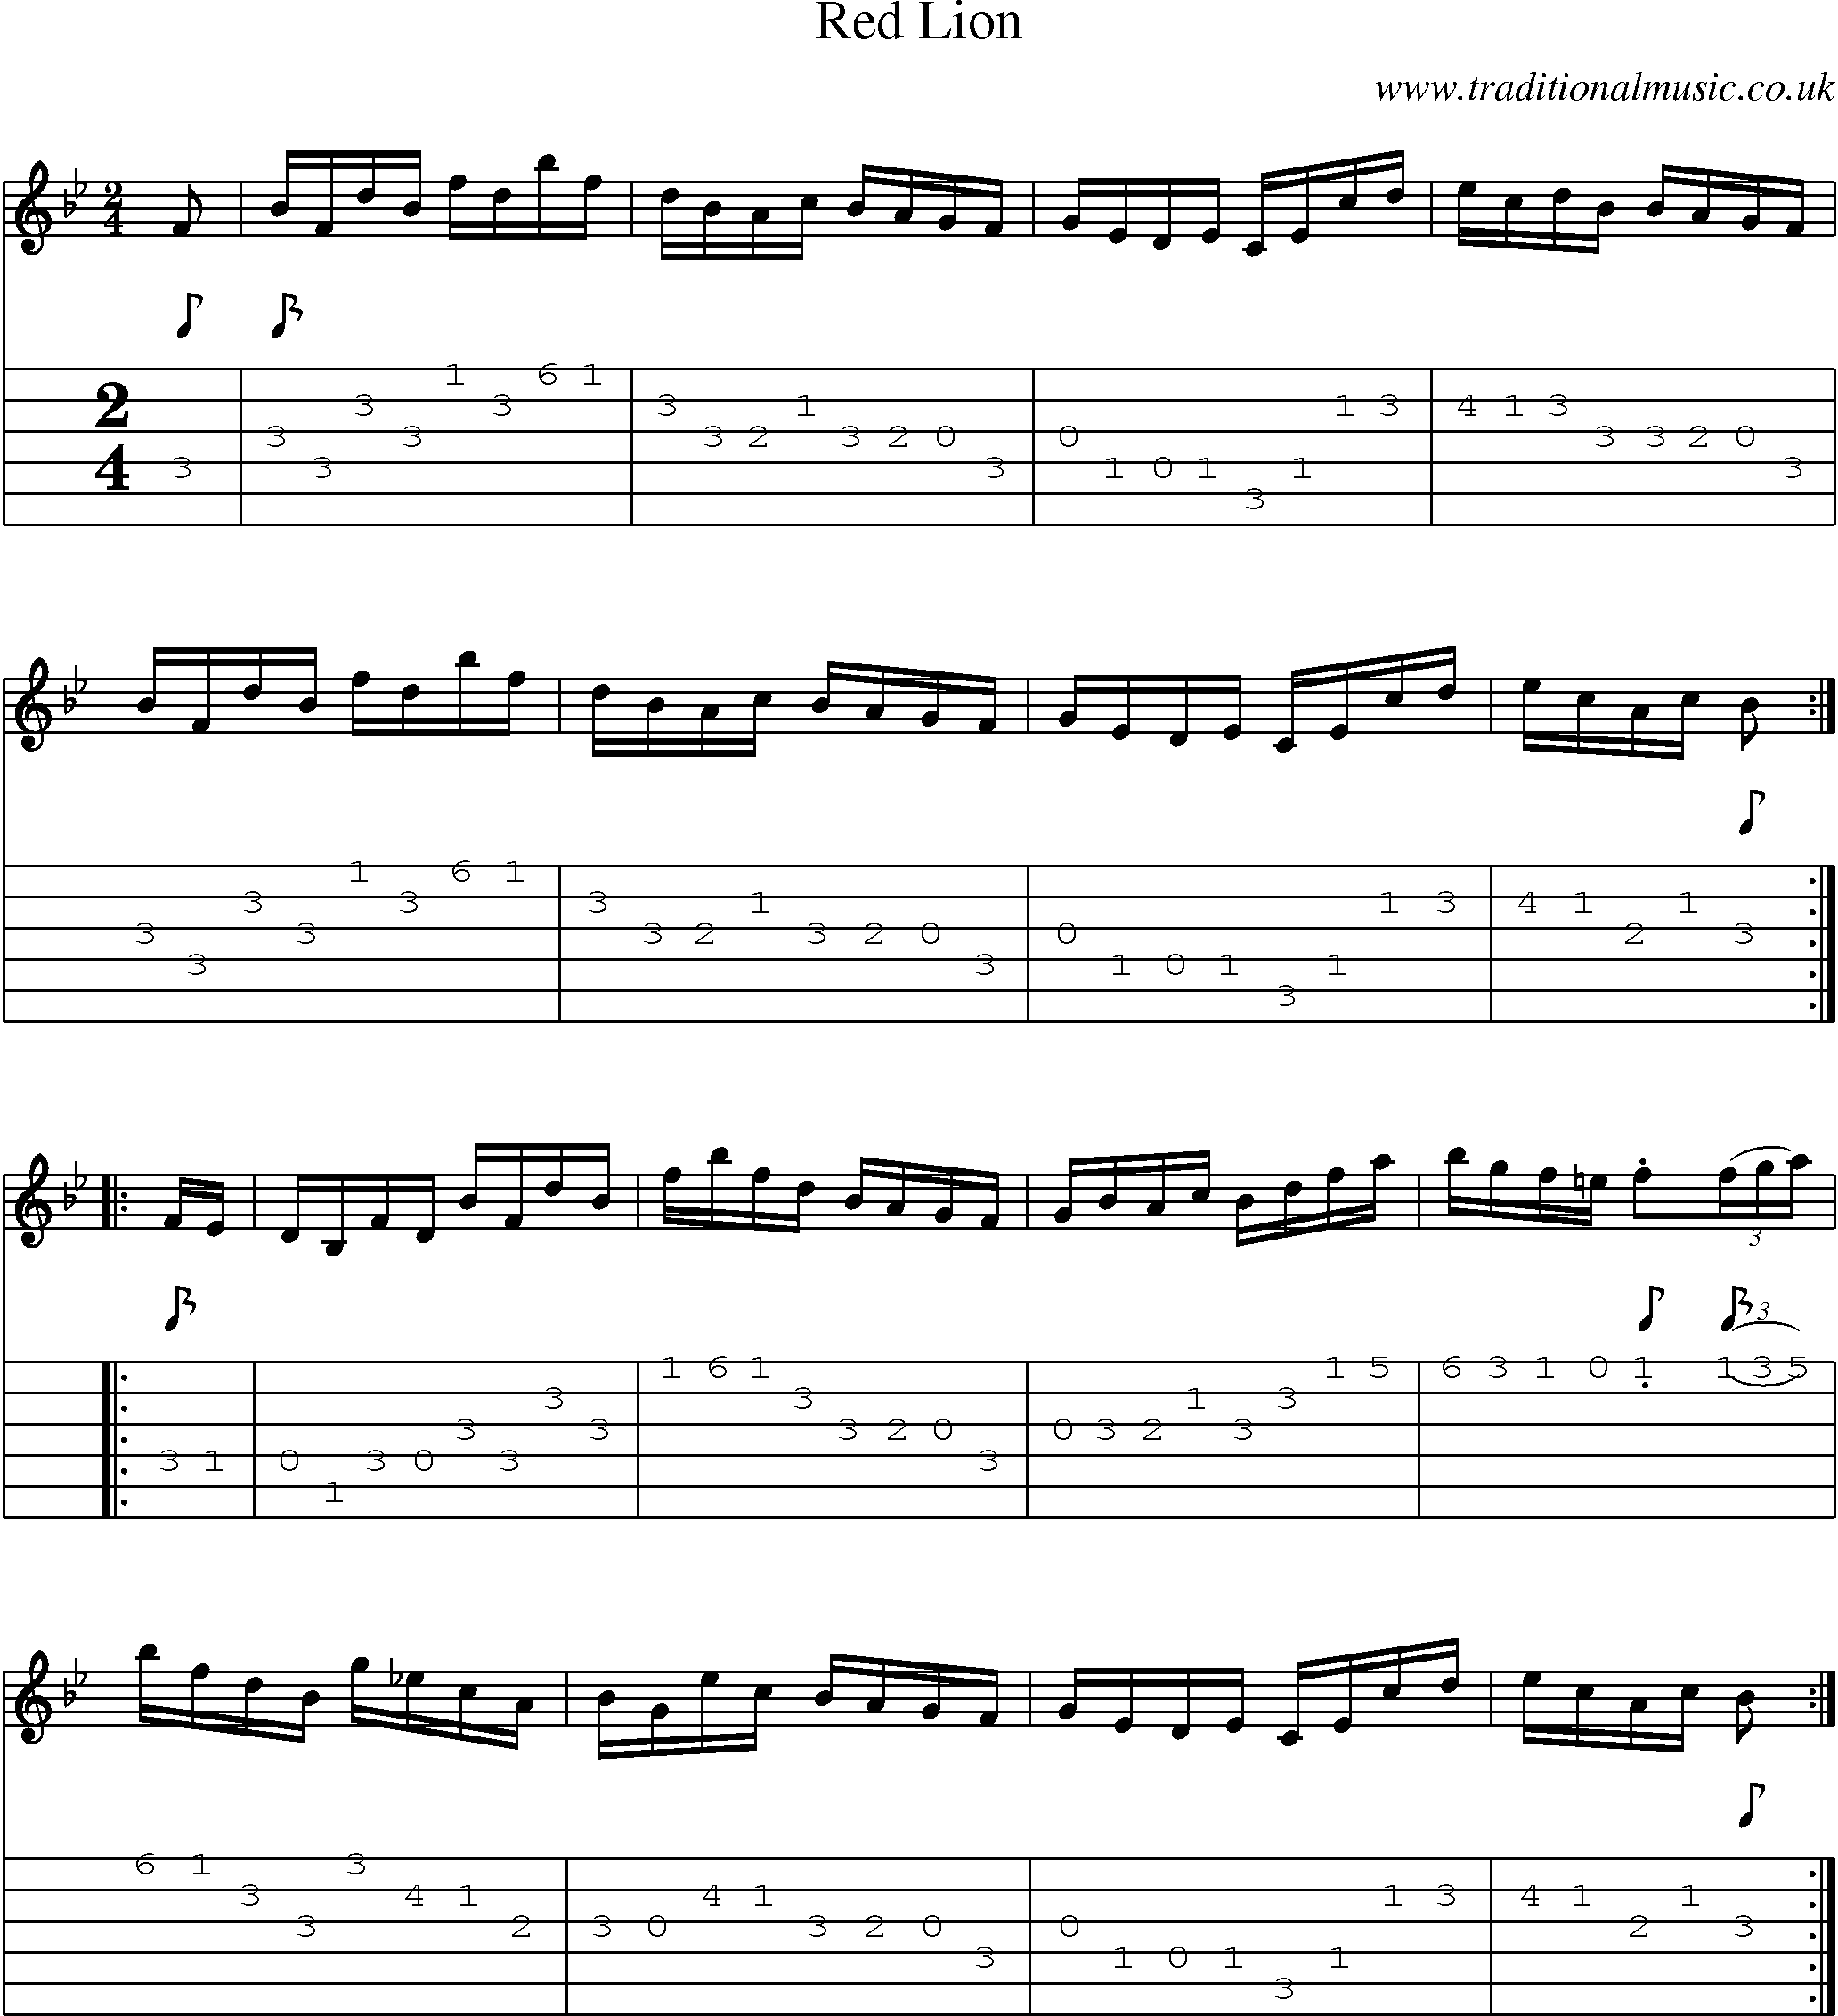 Music Score and Guitar Tabs for Red Lion